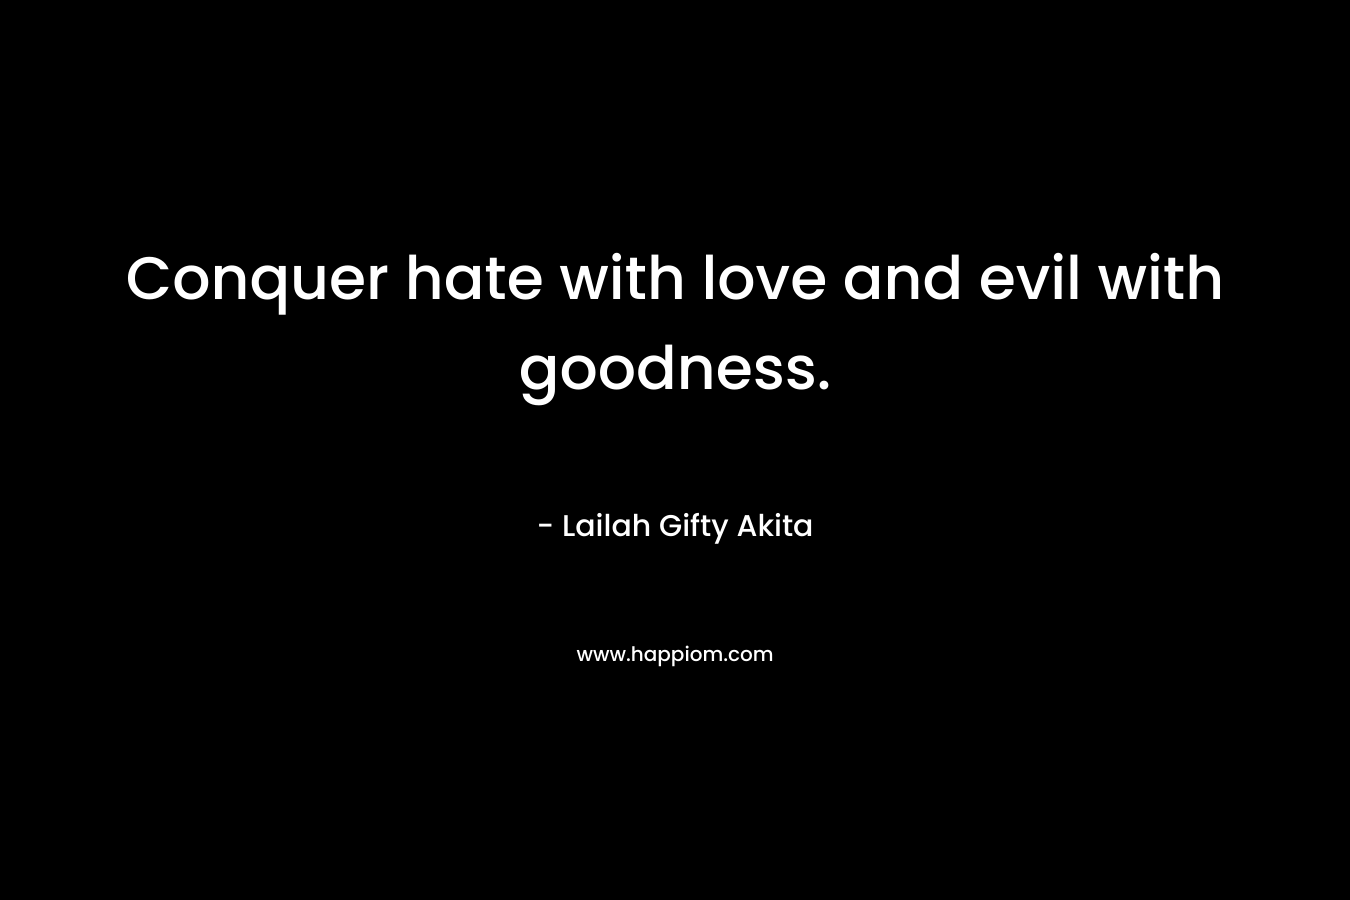 Conquer hate with love and evil with goodness.